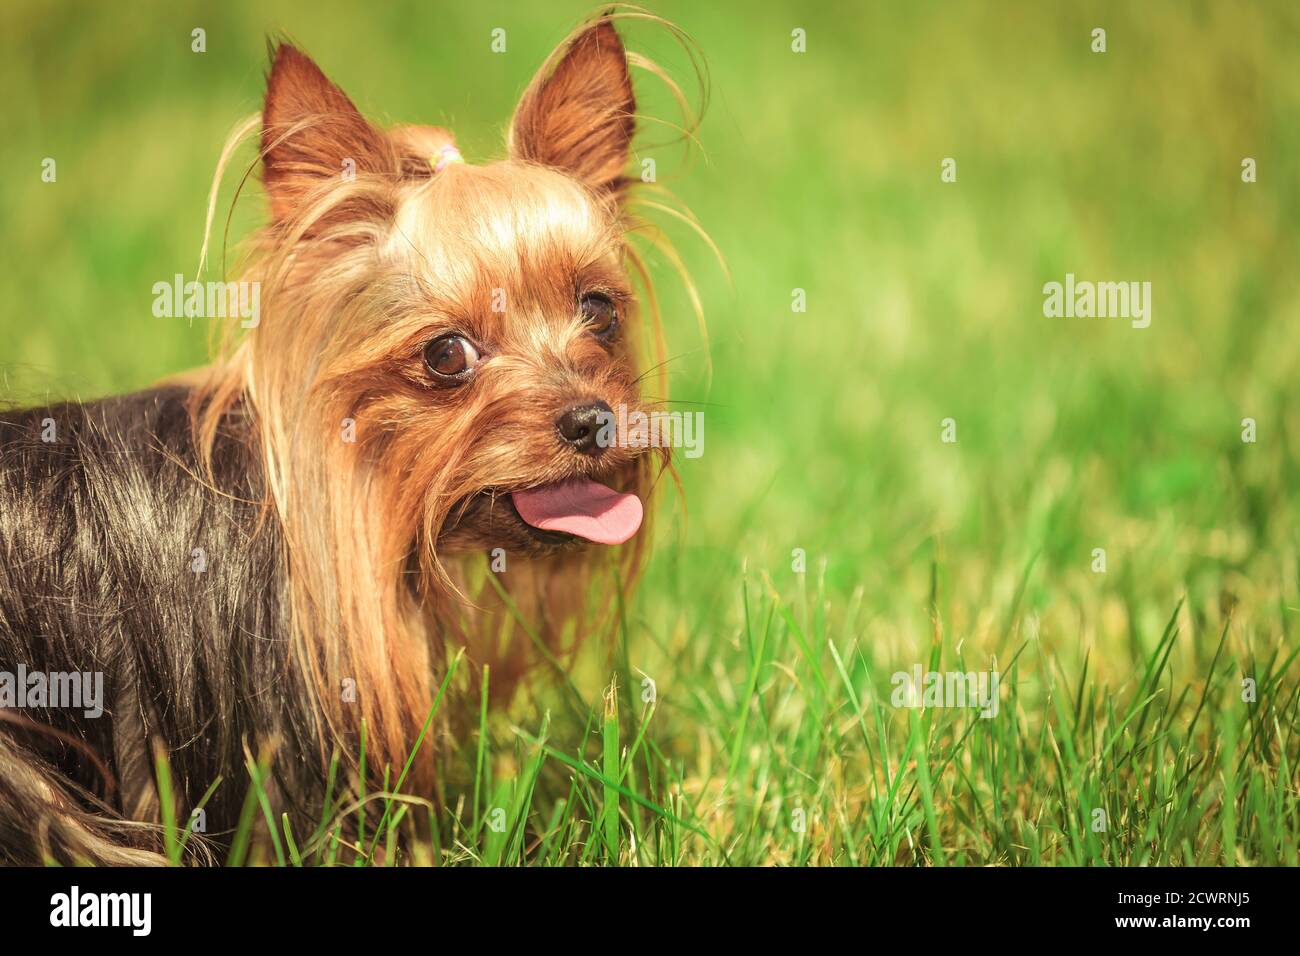 Side View Of A Panting Yorkshire Terrier Puppy Dog With Mouth Open Looking At The Camera Closeup Picture Stock Photo Alamy